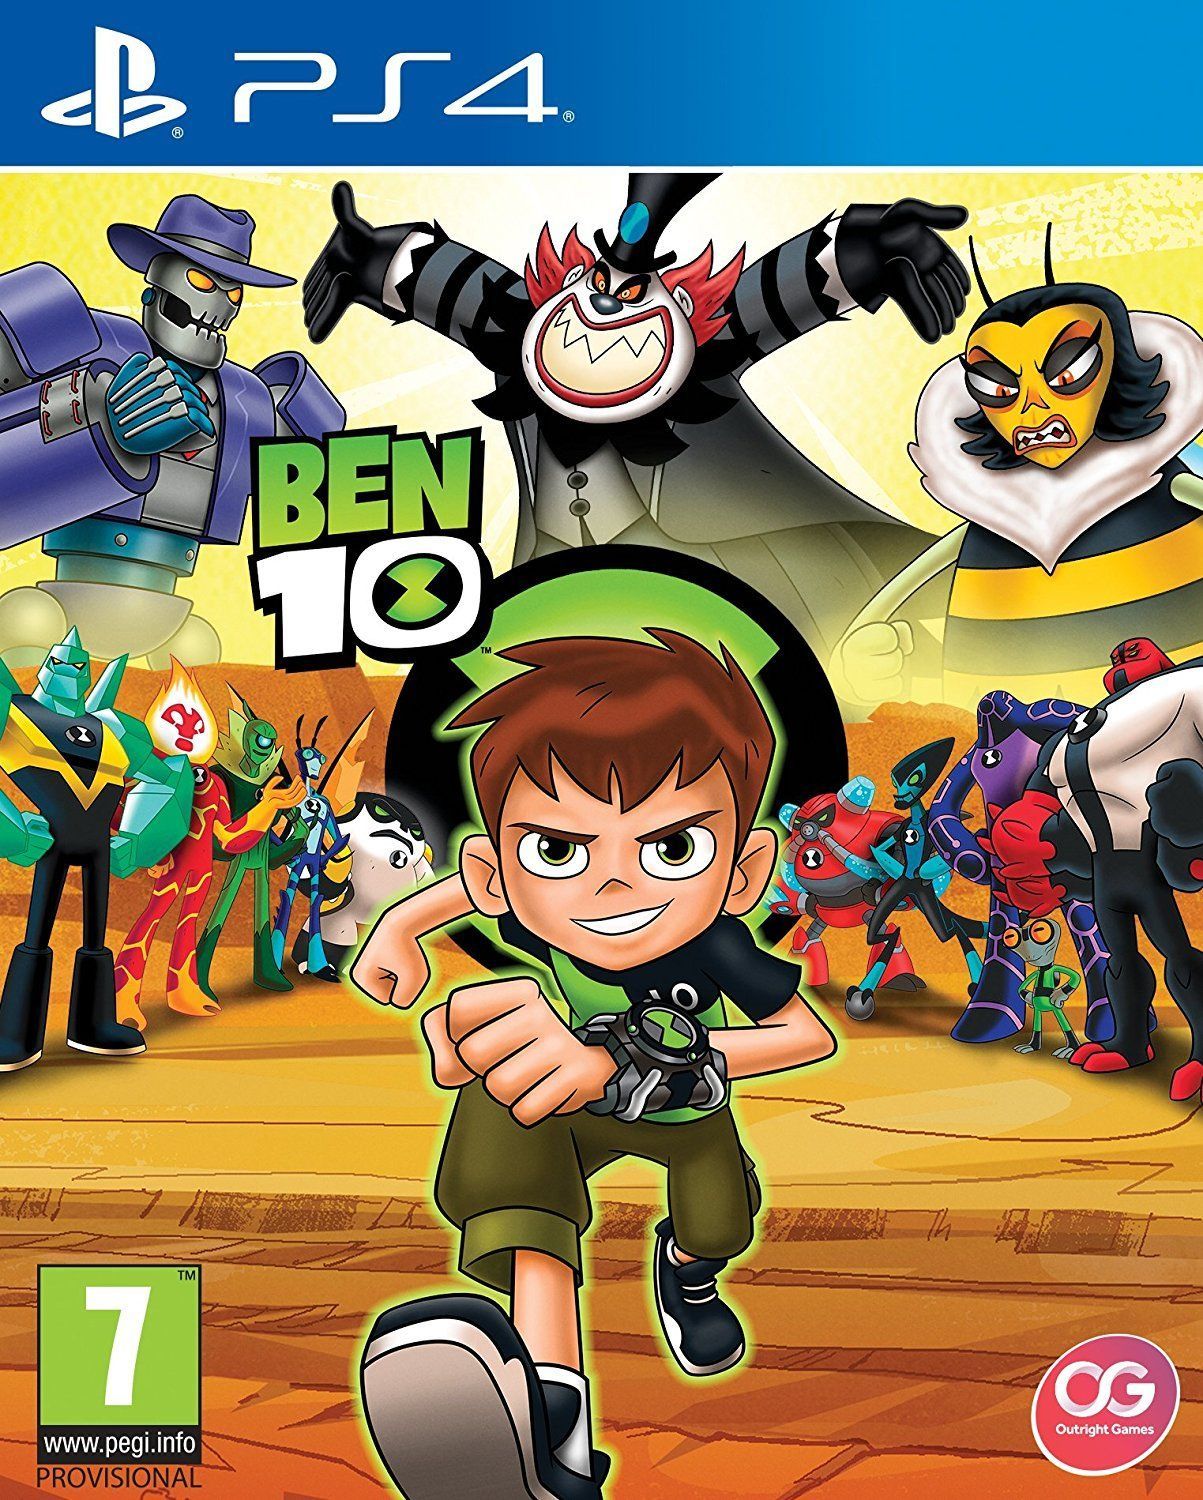 Ben 10 - Videojuego (PS4, PC, NDS, Switch, One Wii) - Vandal